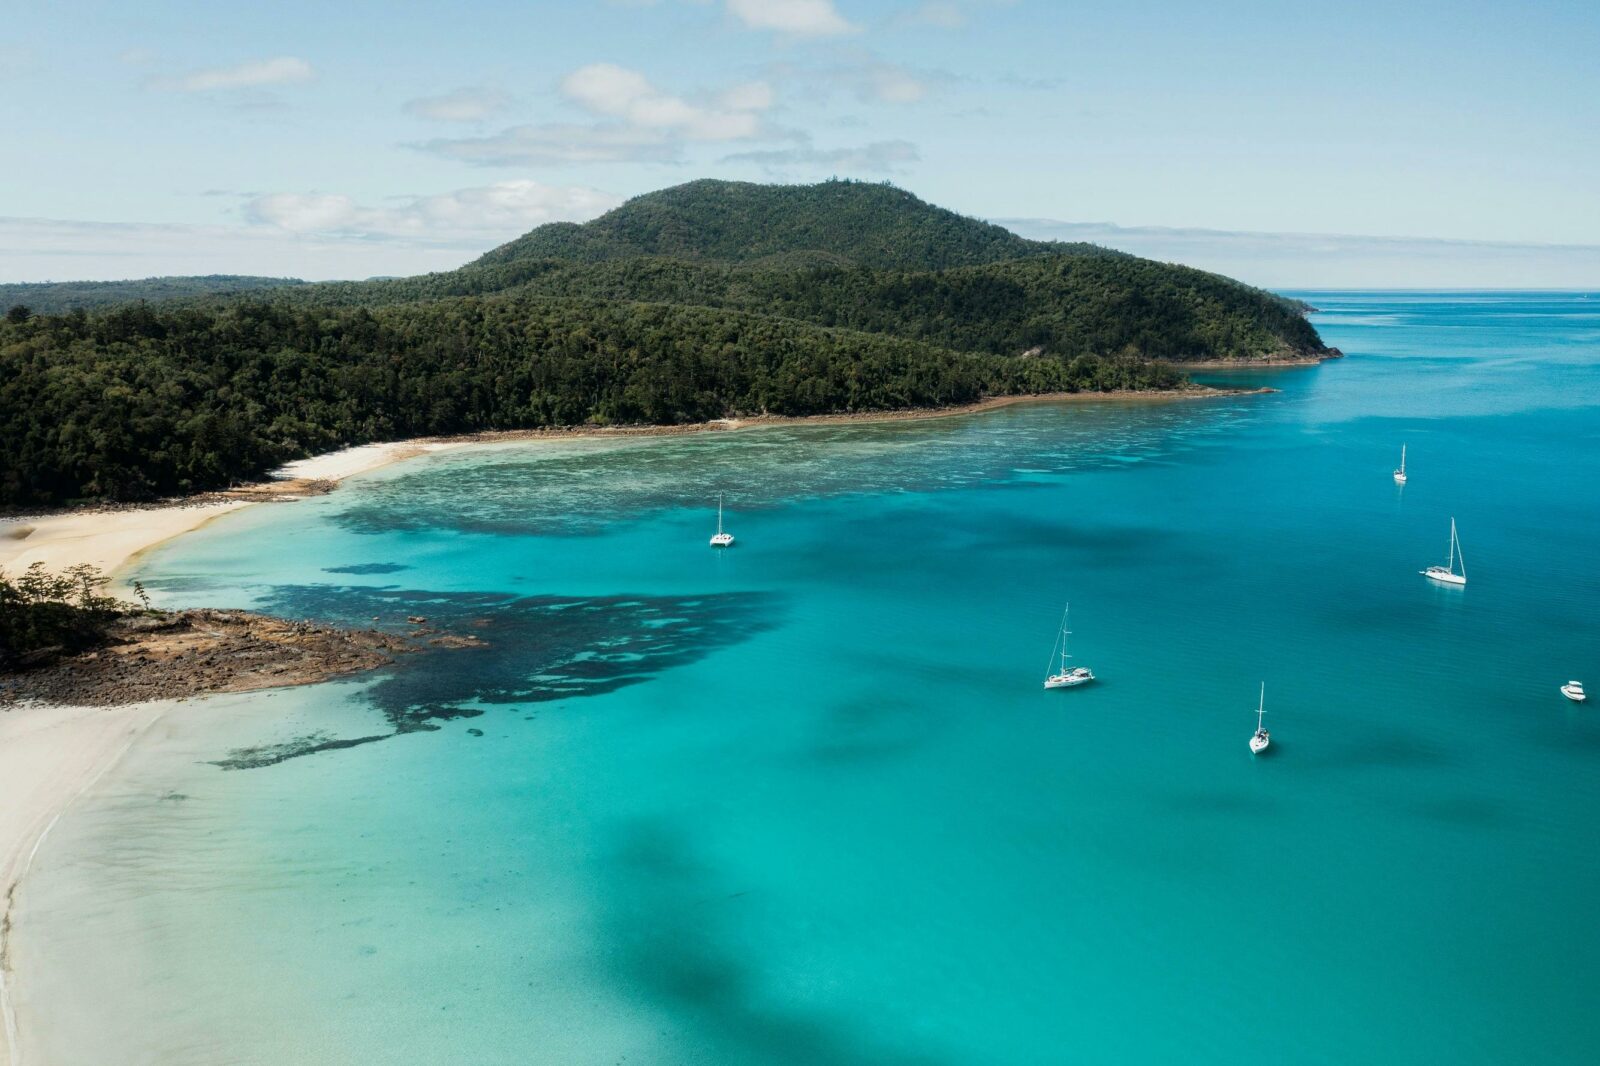 Aerial view of chance bay with sailing boats close to the beach and island hill covered in trees.